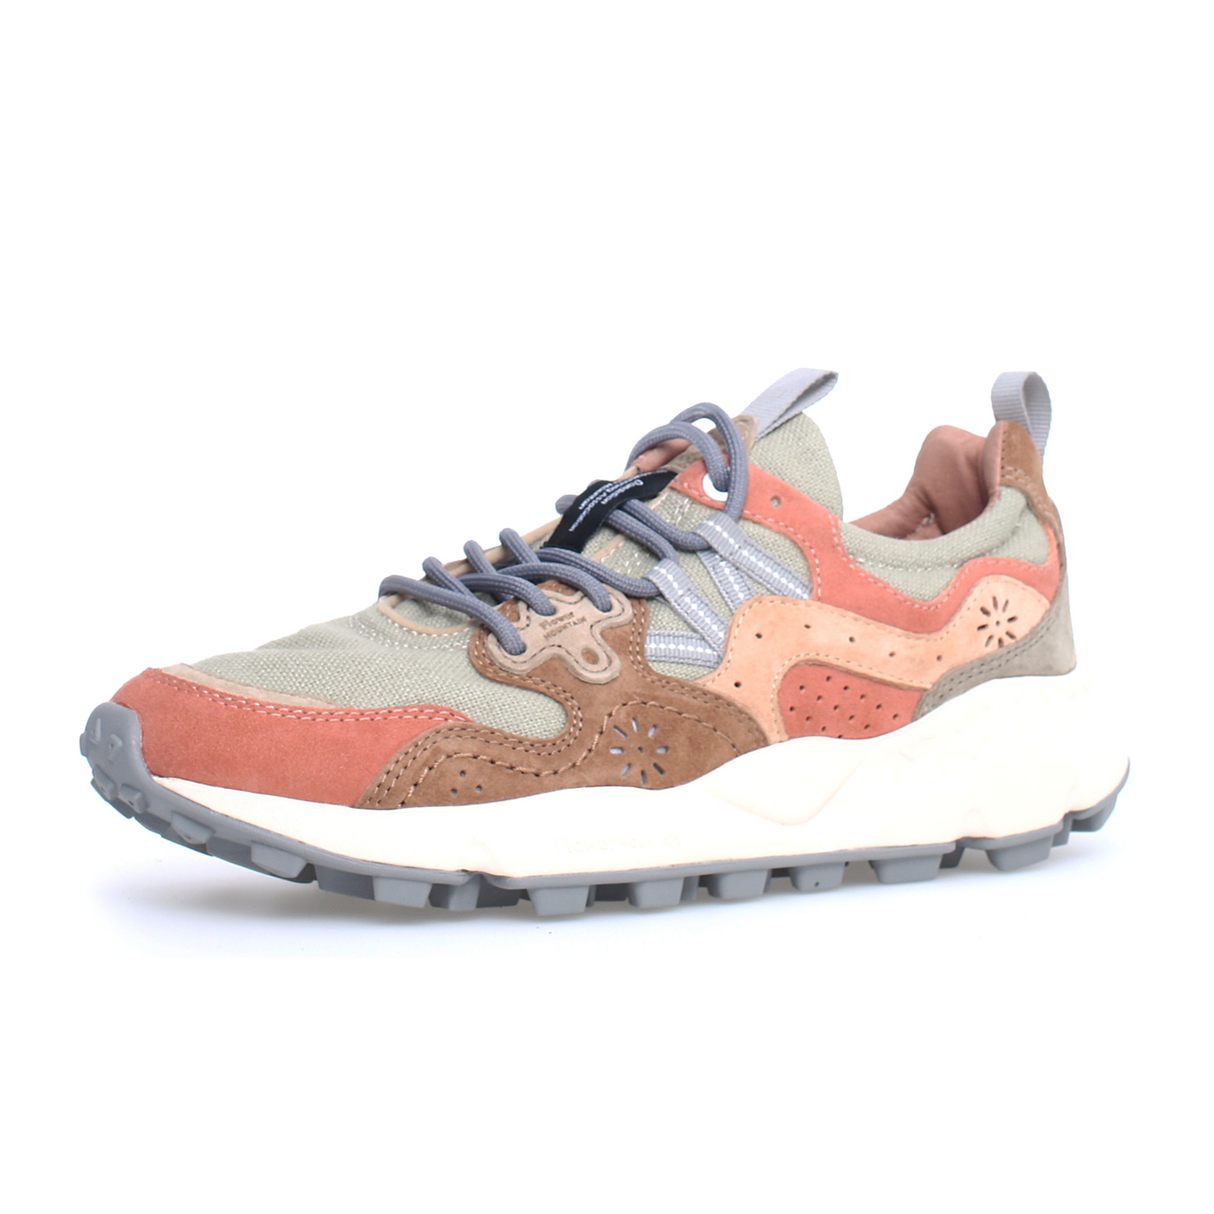 Flower Mountain Yamano 3 Sneaker (Women) - Brown/Beige Athletic - Casual - Lace Up - The Heel Shoe Fitters